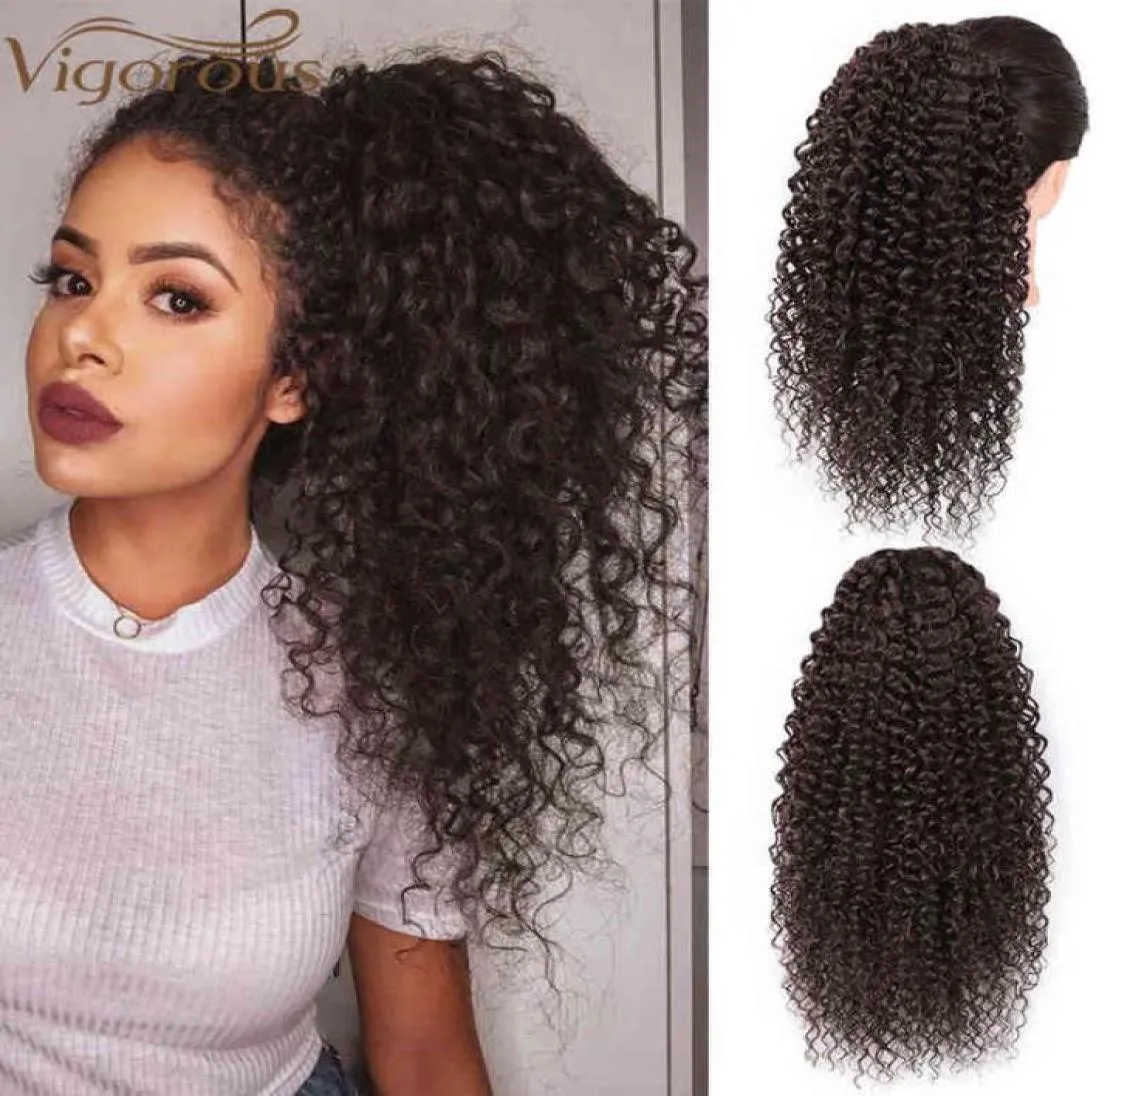 Vigorous Drawstring Puff tail Afro Curly Hair Extension Clip in Tail African American Synthetic Hair Extensions 2101081036518